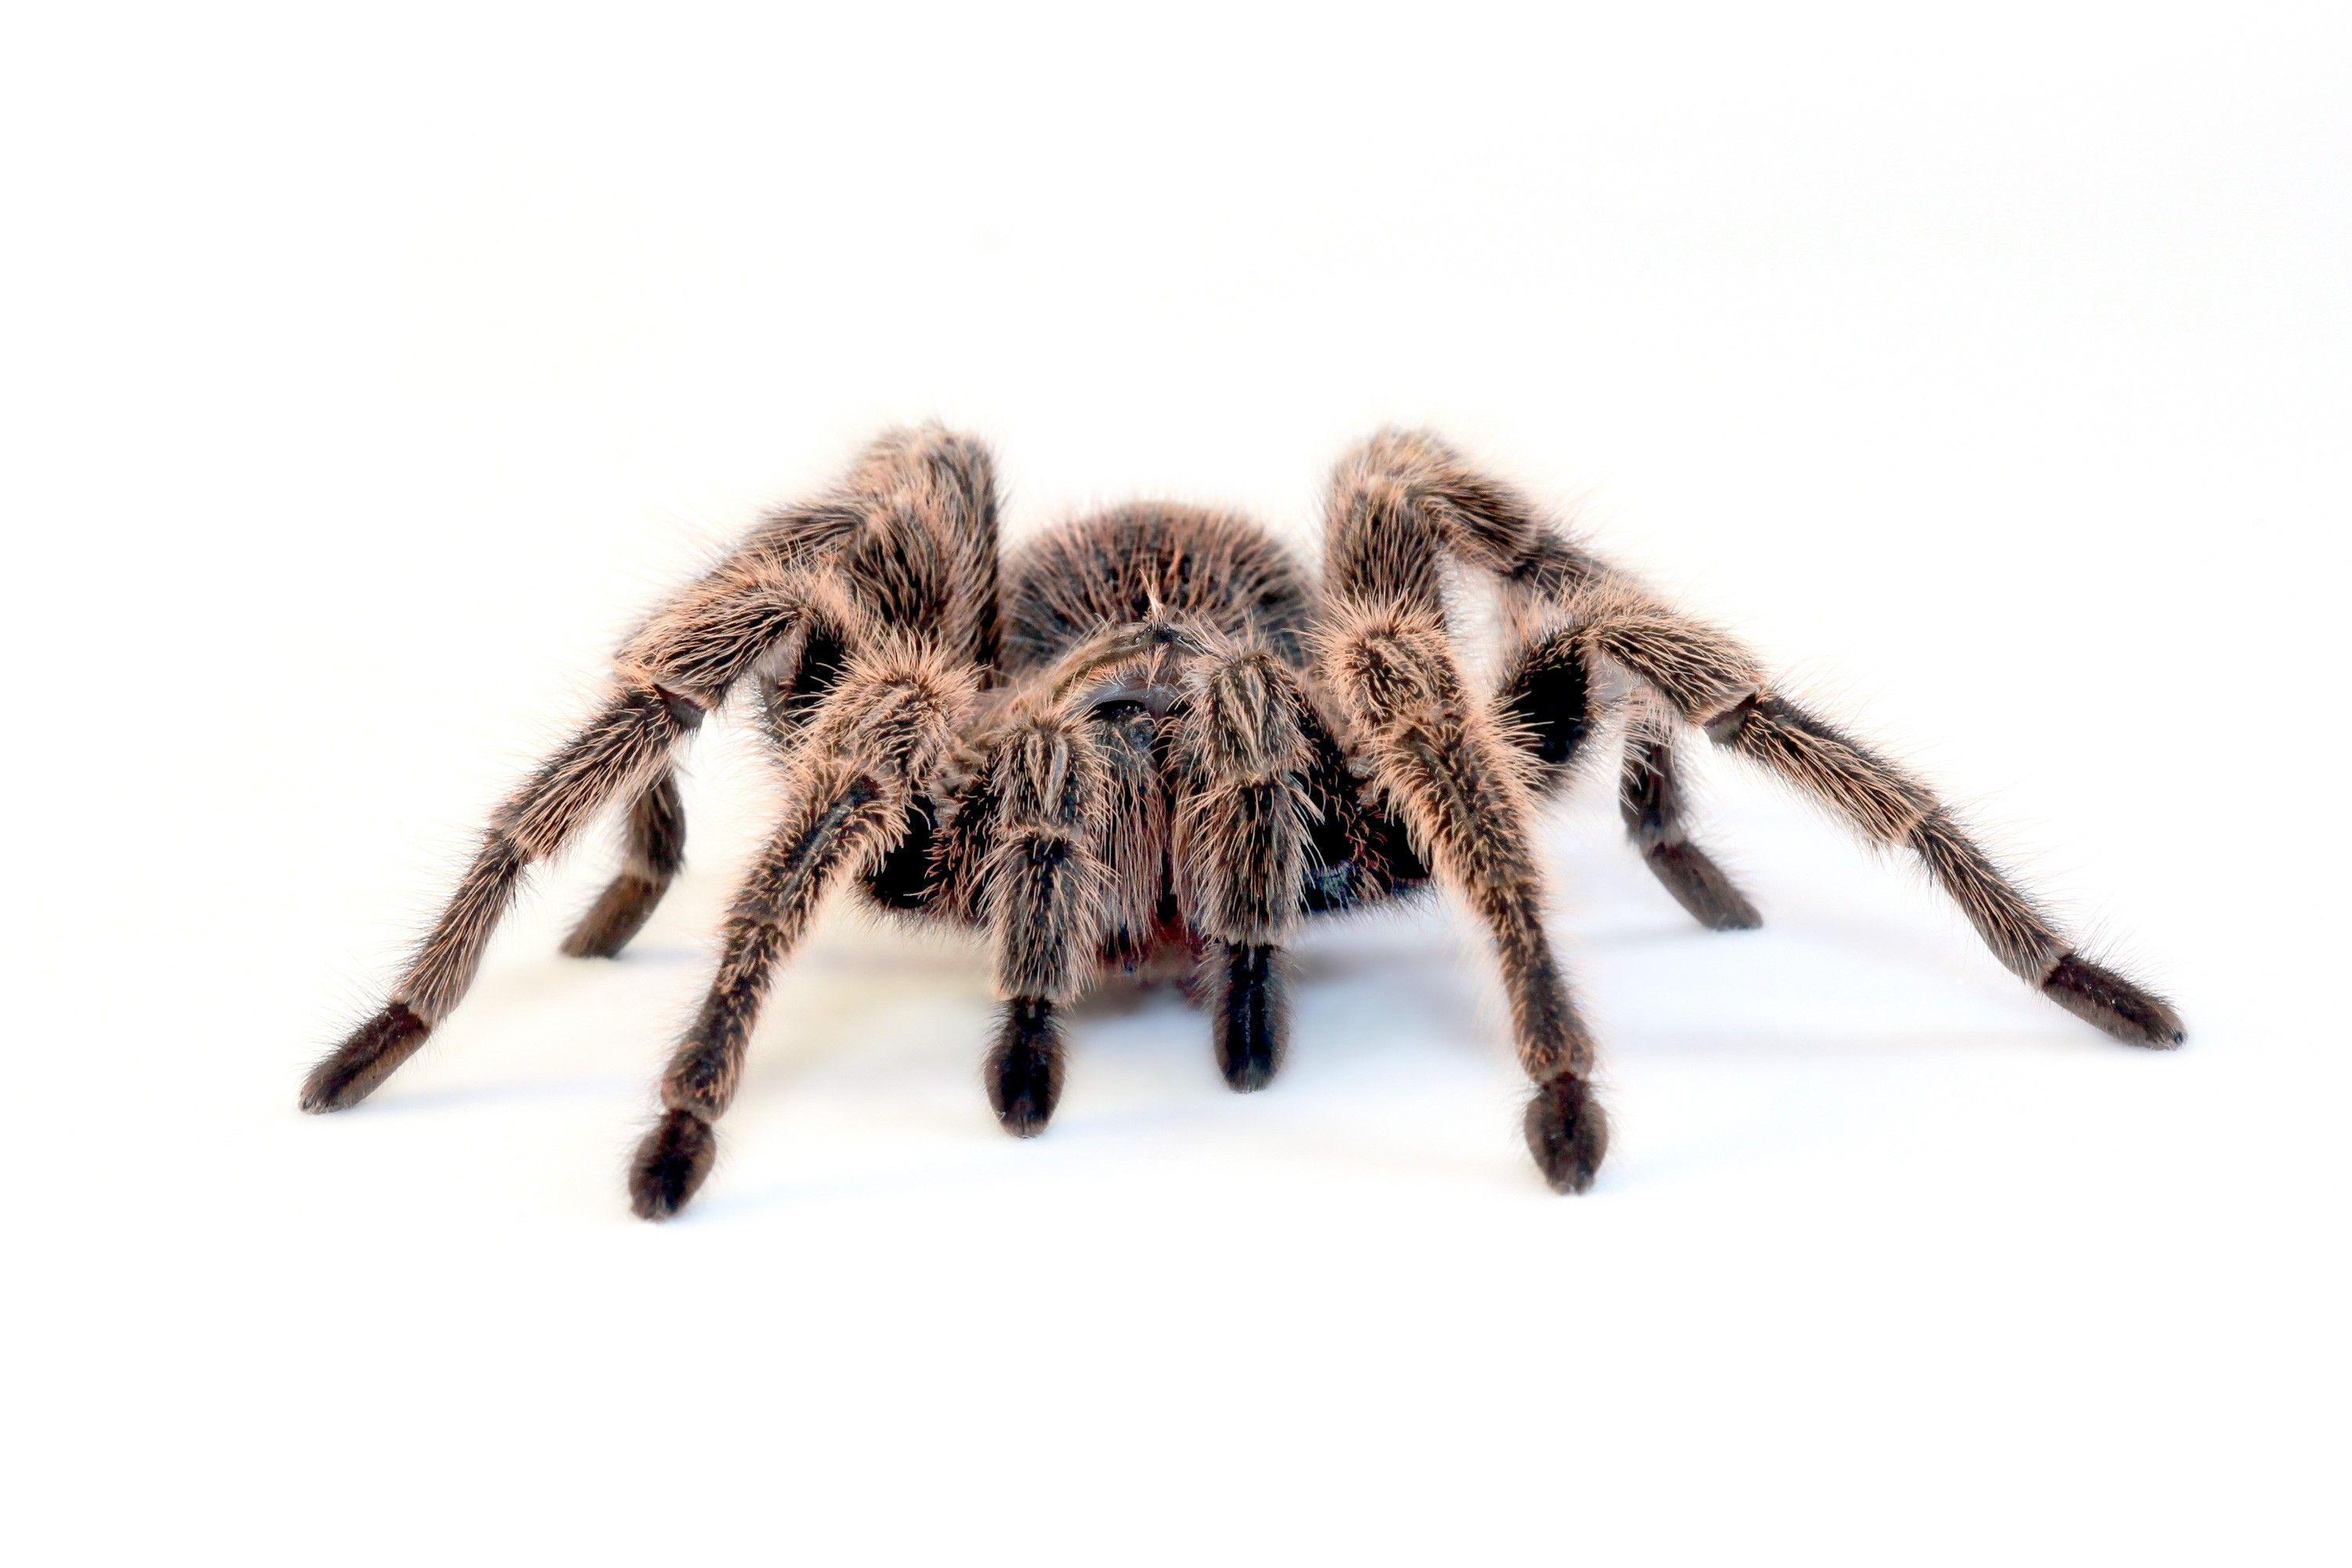 spiders, simple background, tarantula, white background wallpaper